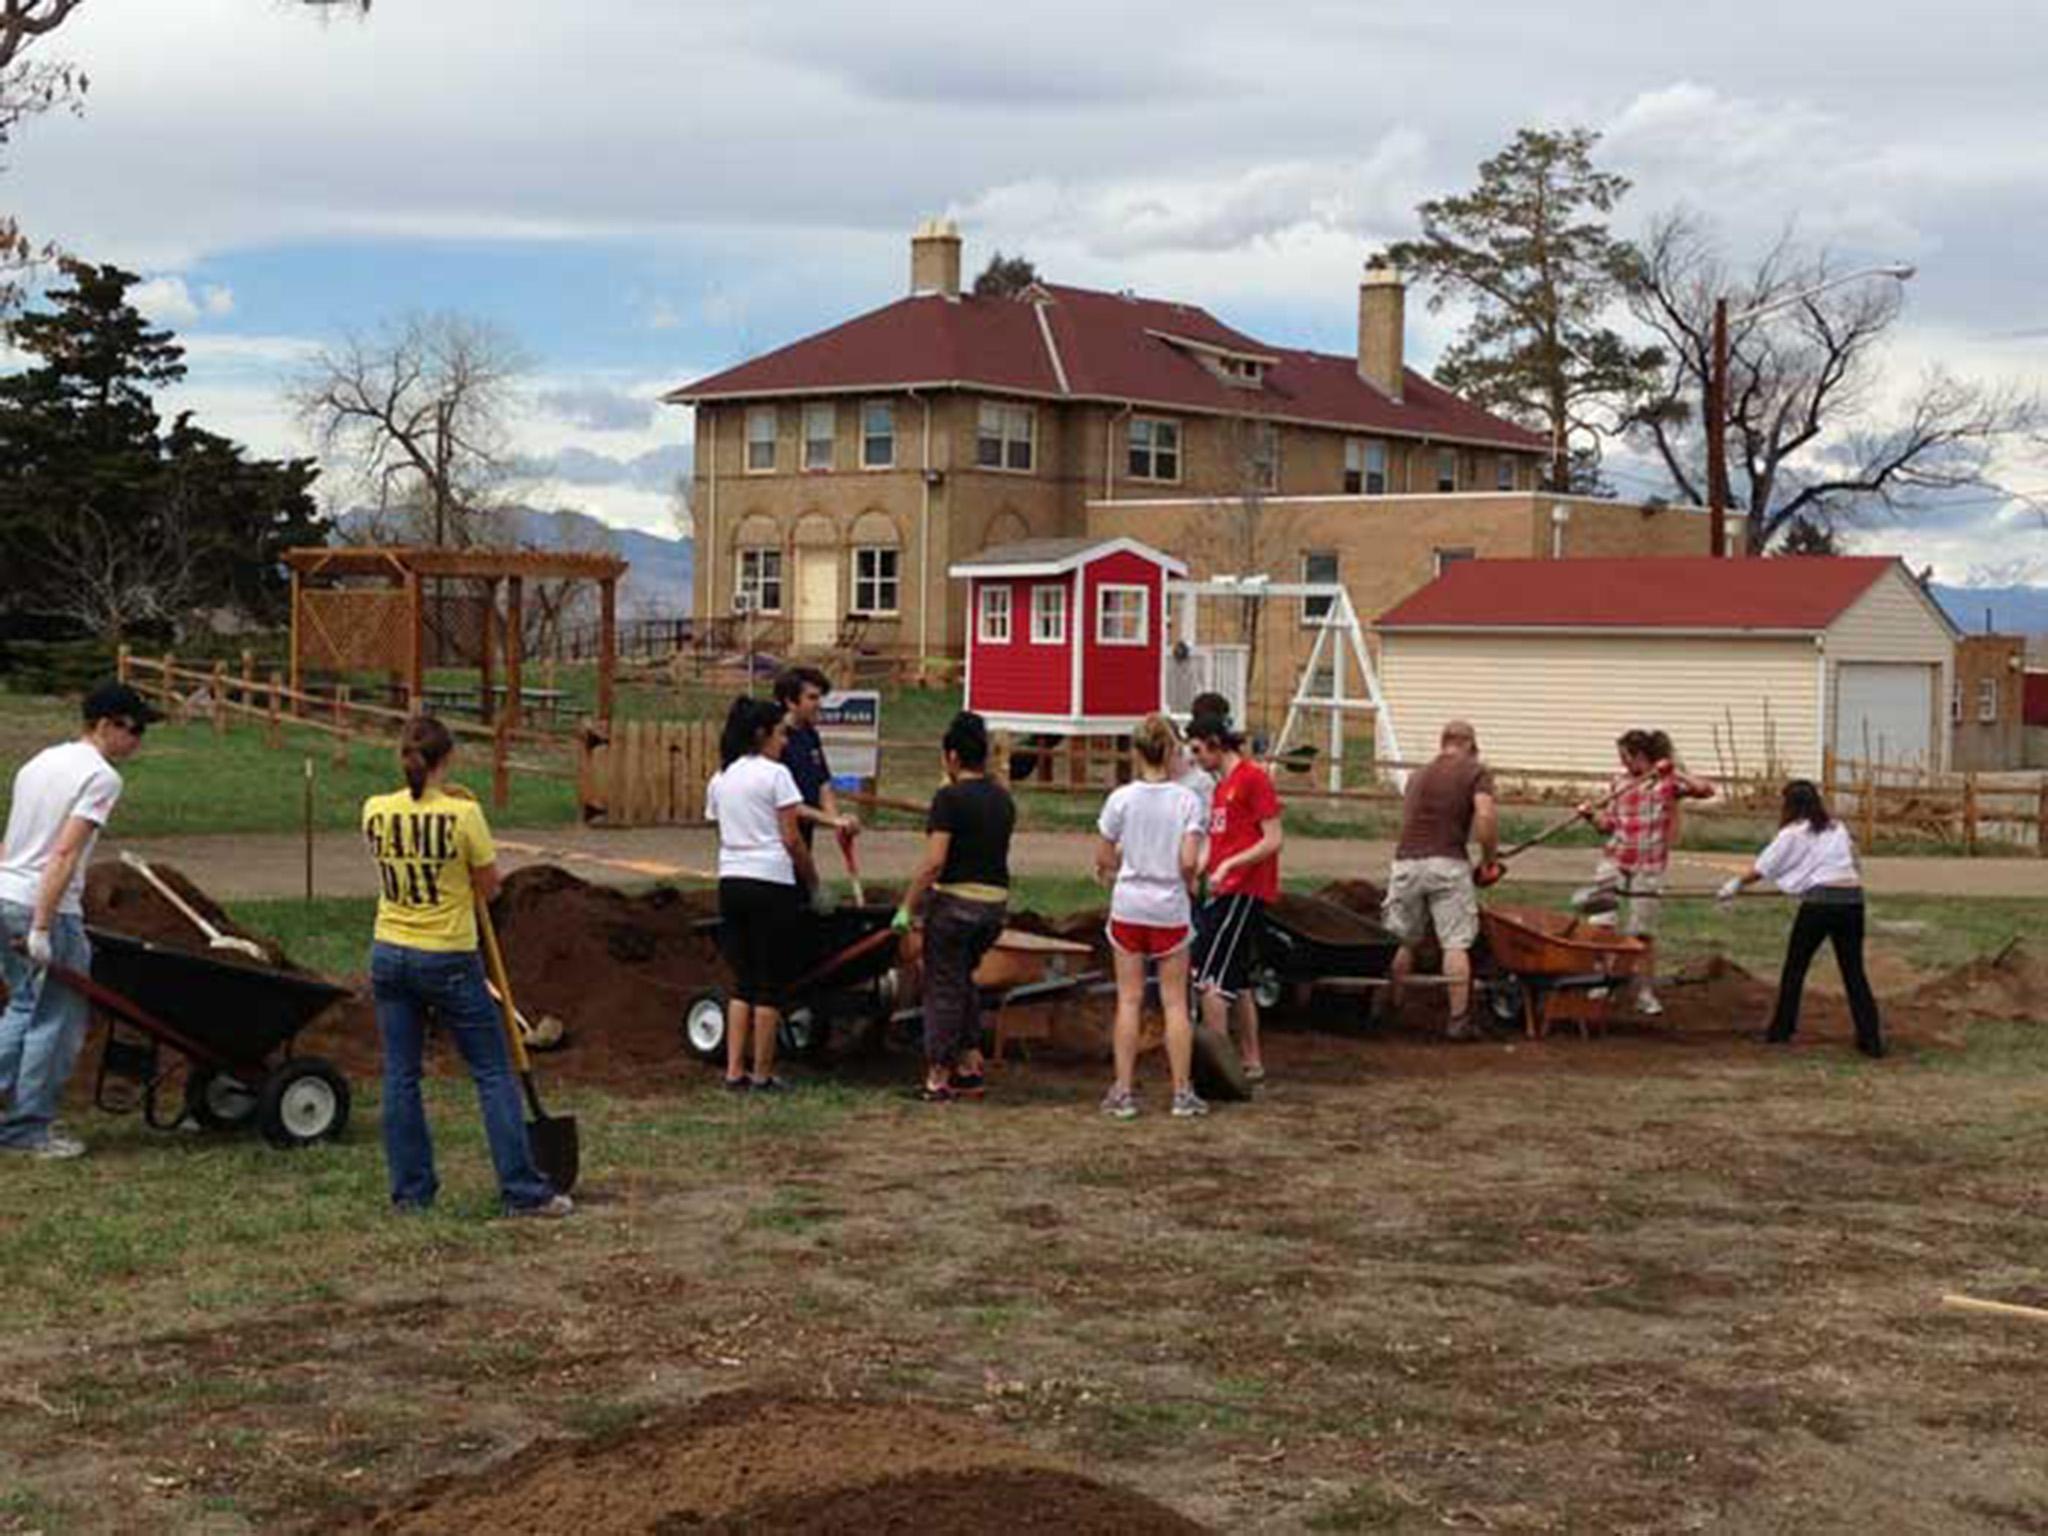 Dig in: members of the Aria community work on their garden together